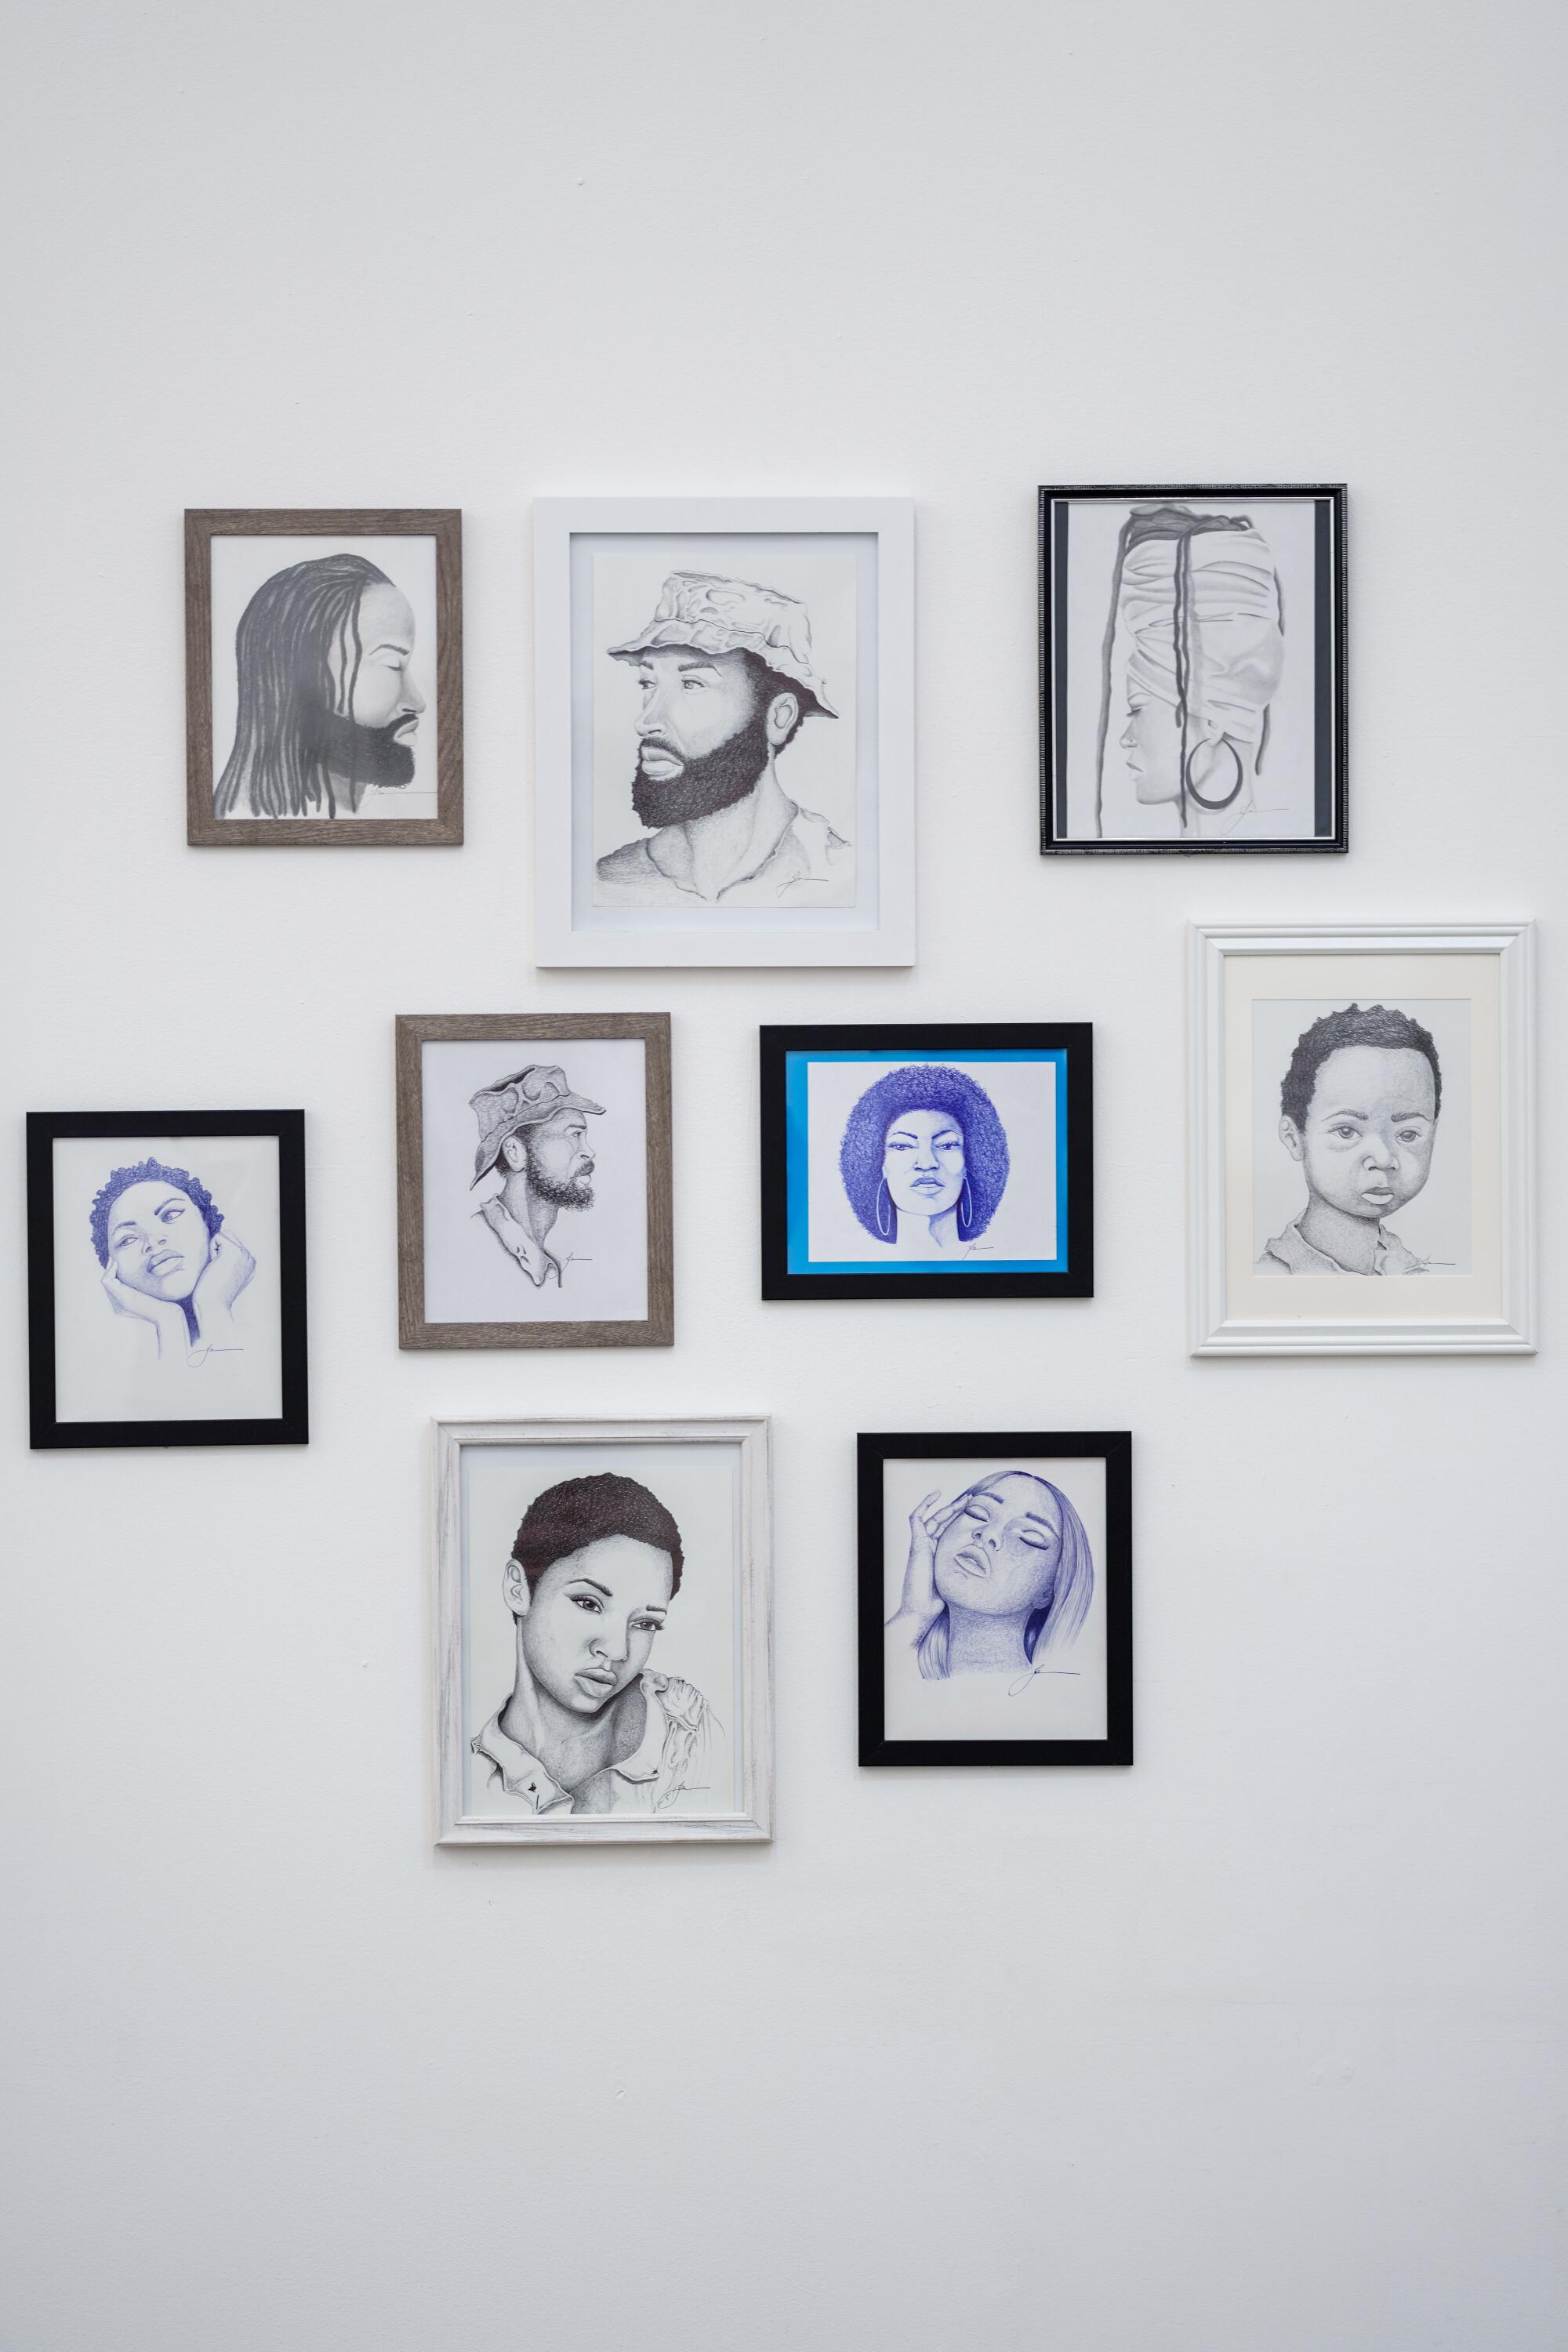 Jason Perry's drawings are on display at the art exhibition located at the Bail Project.